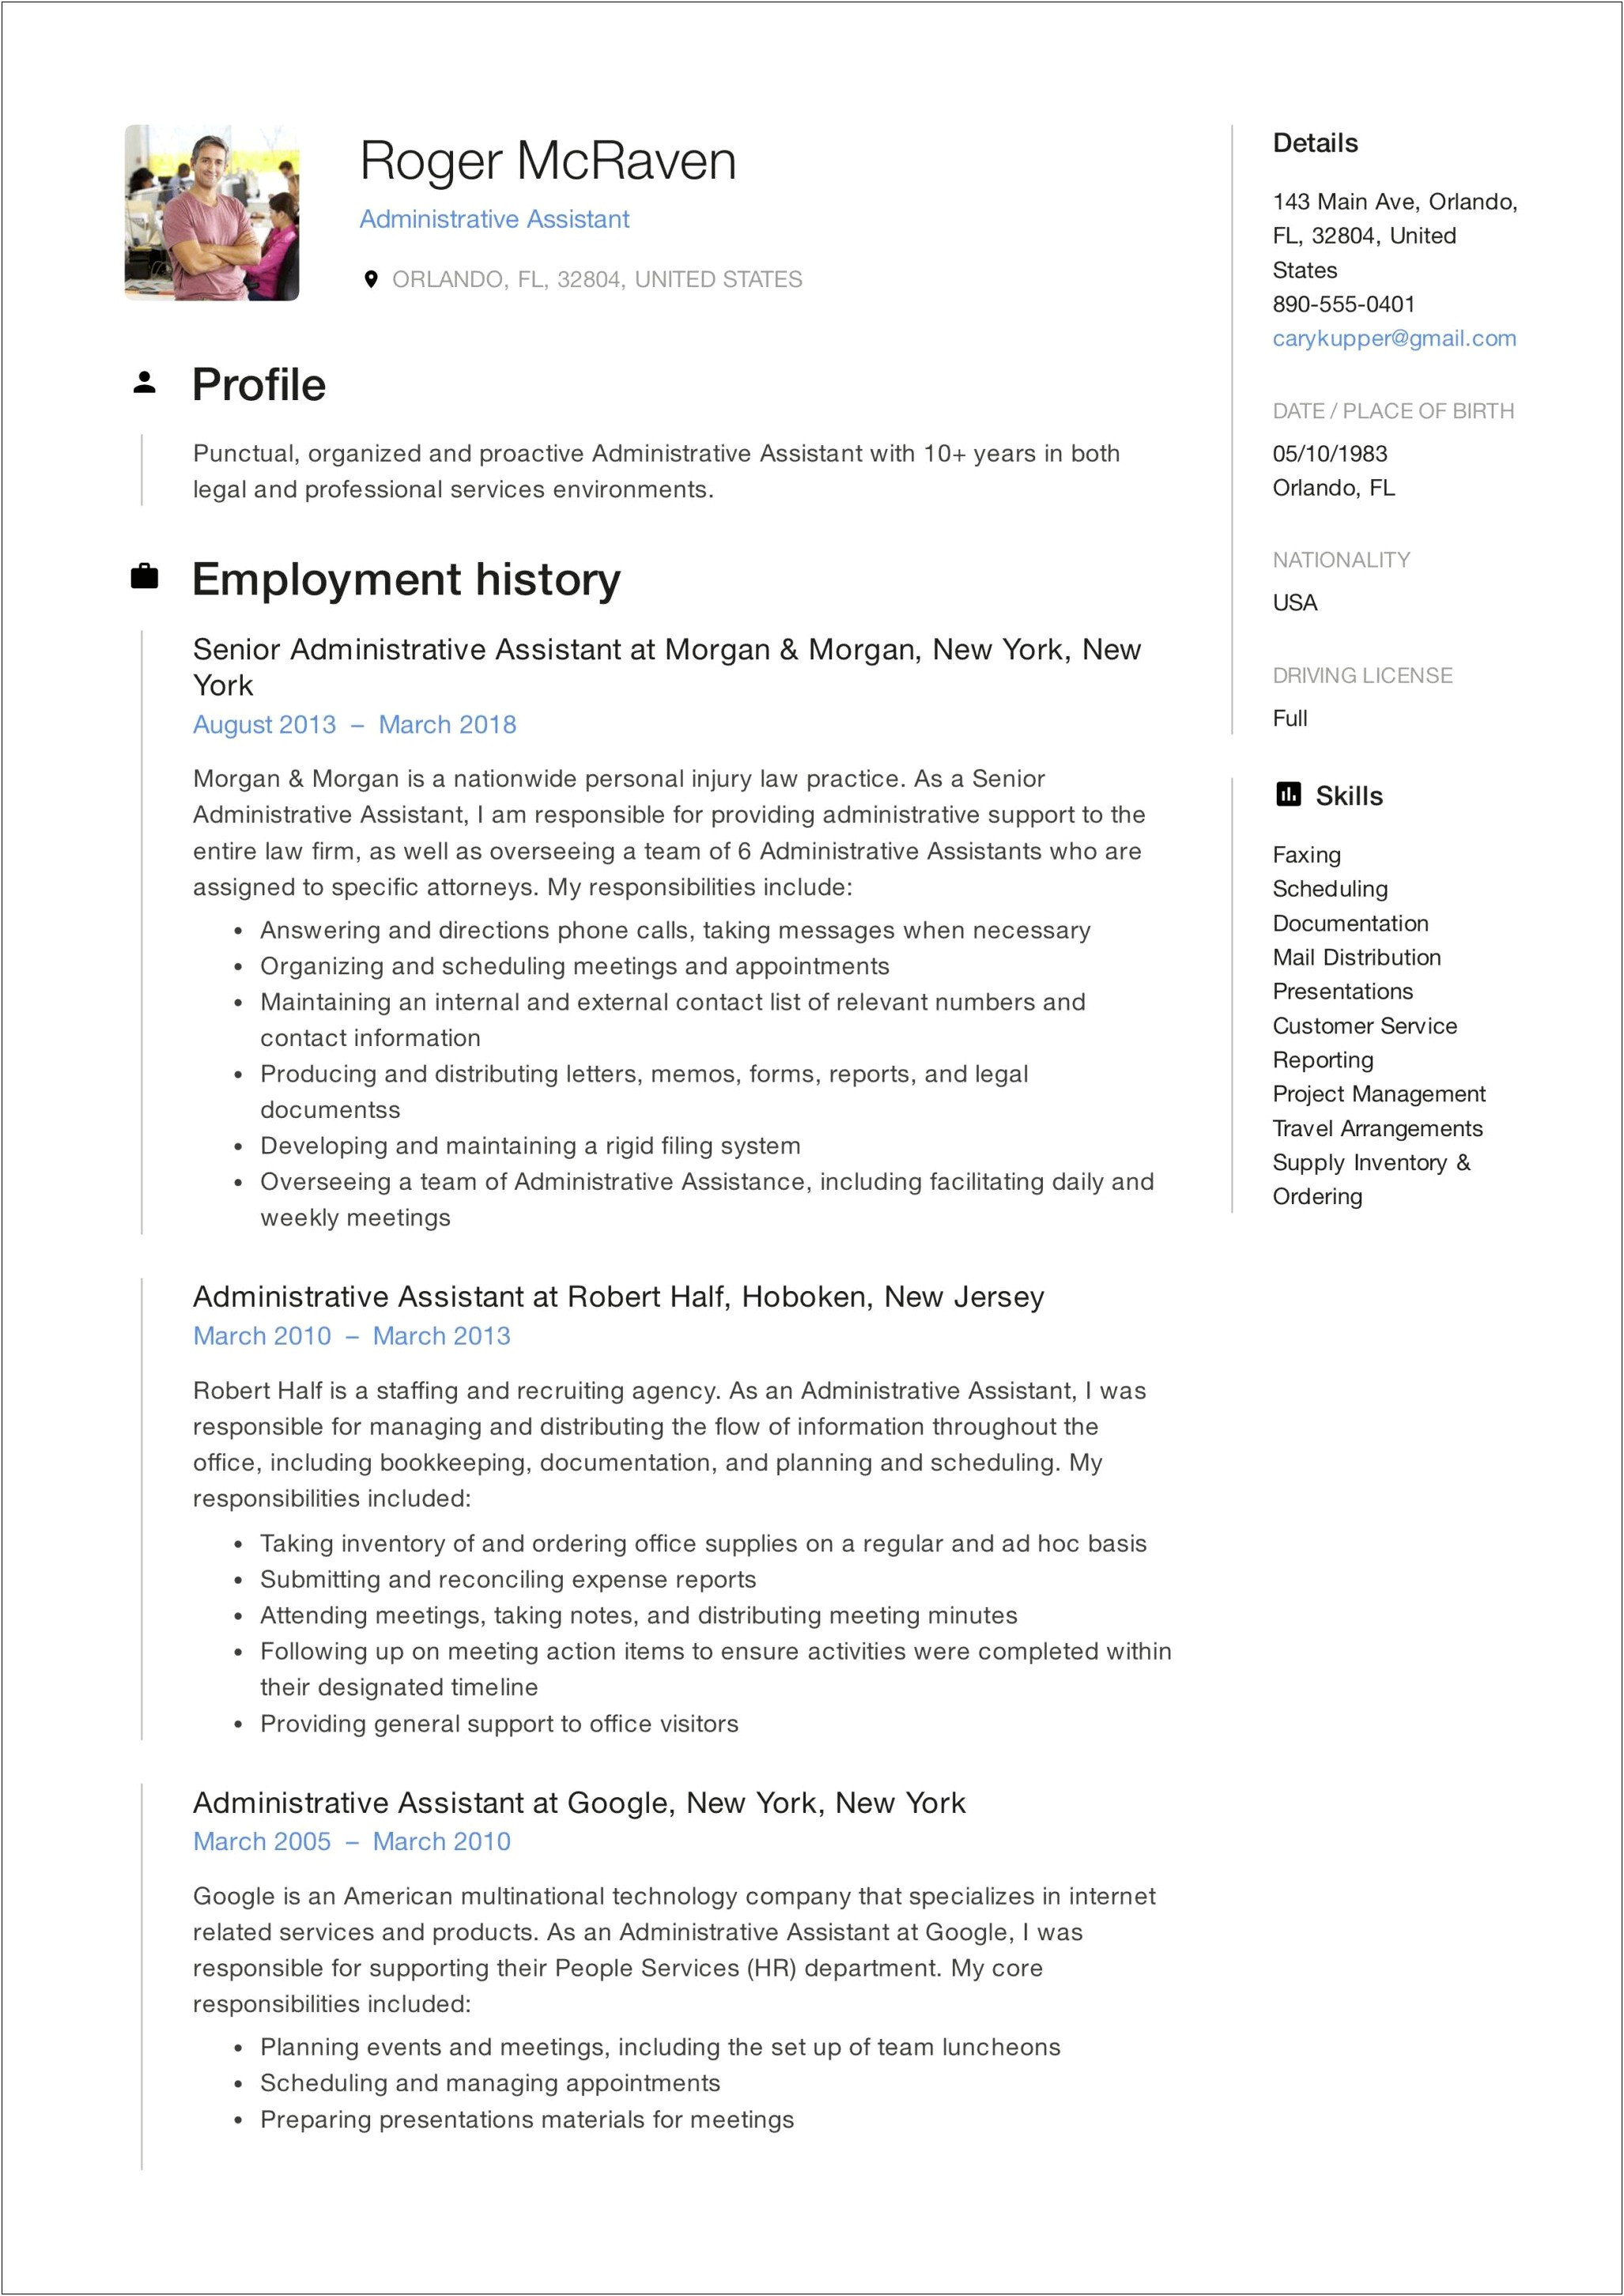 Administrative Assistant Resume Skills Section